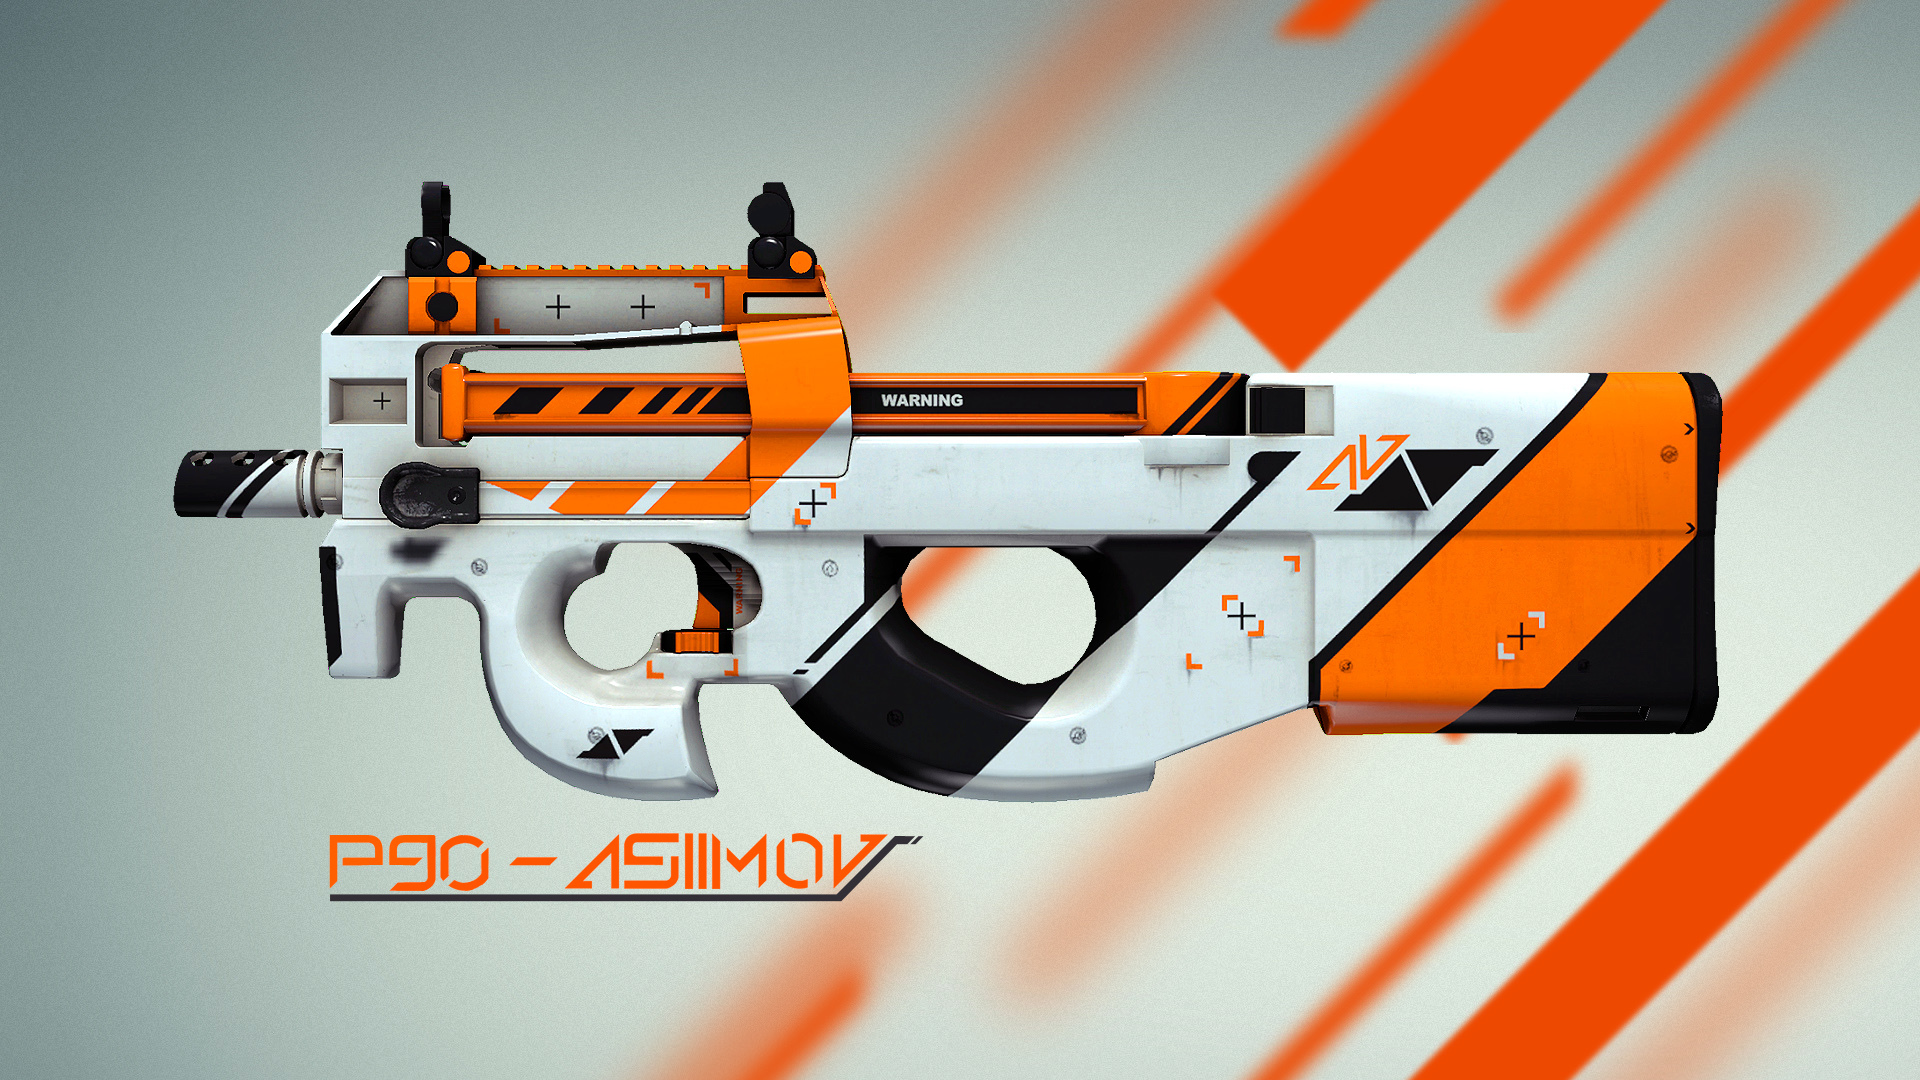 download the last version for ios P90 Storm cs go skin